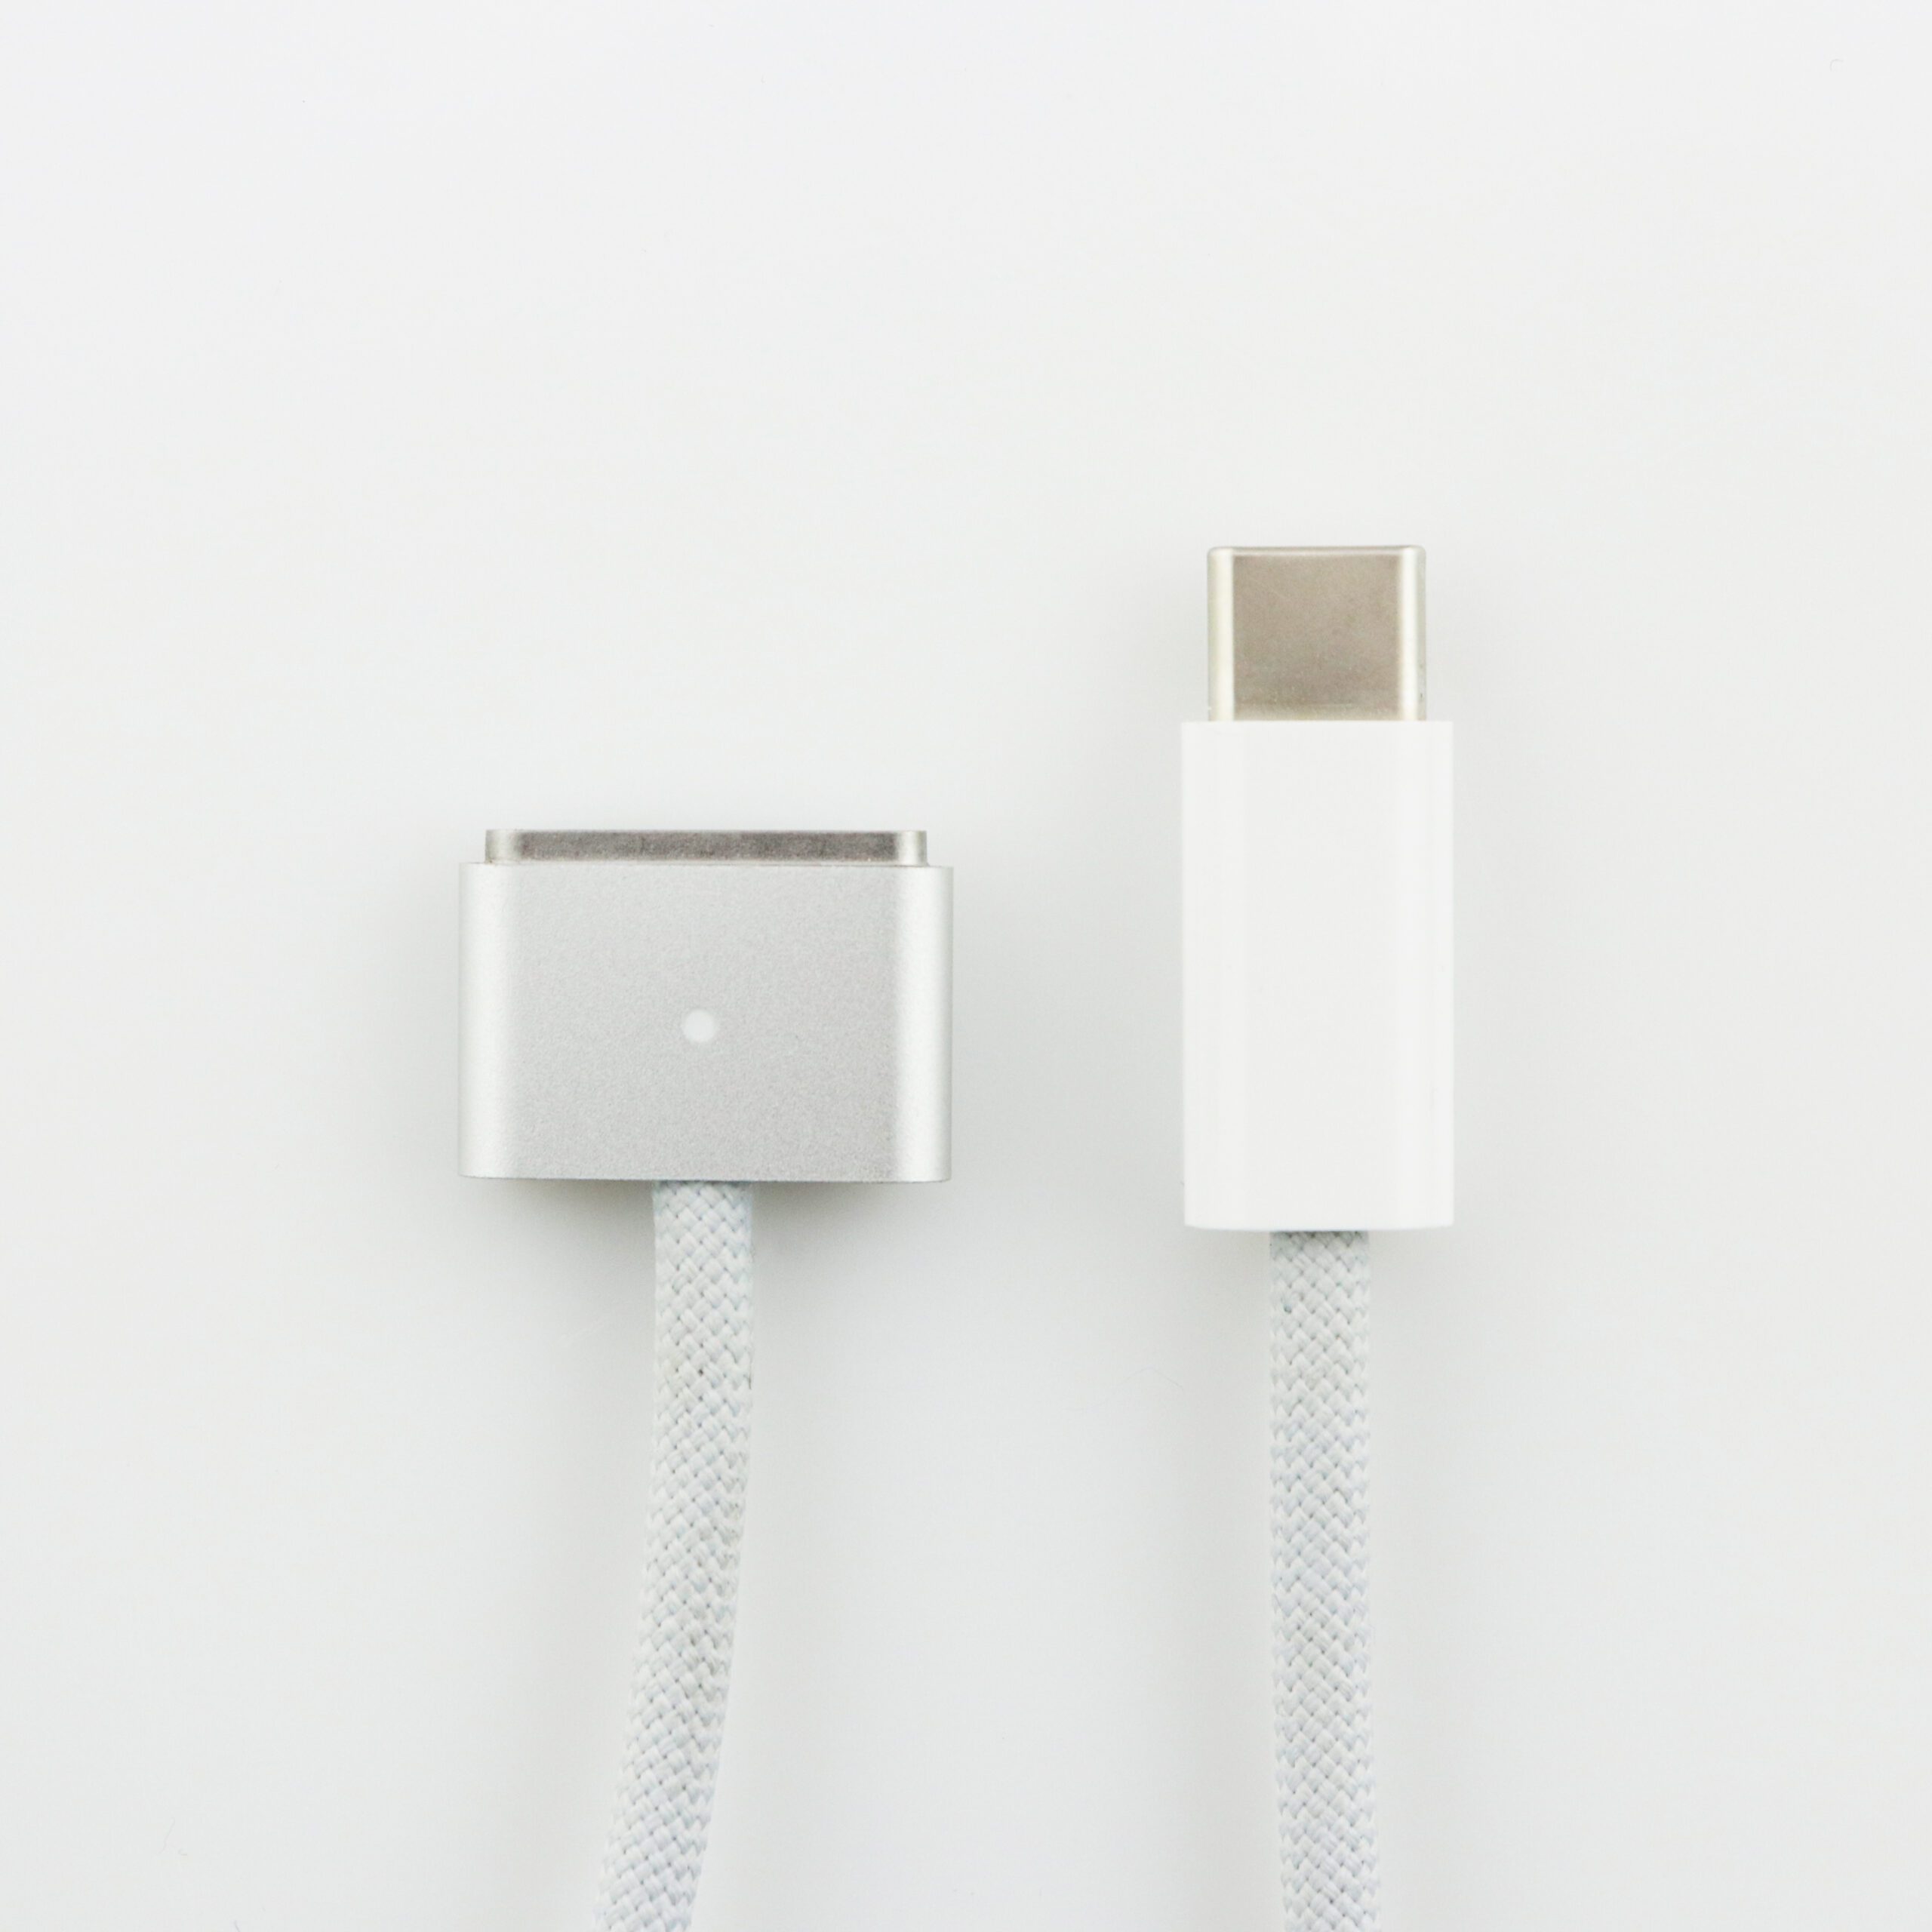 1 x Magsafe 3 Cable